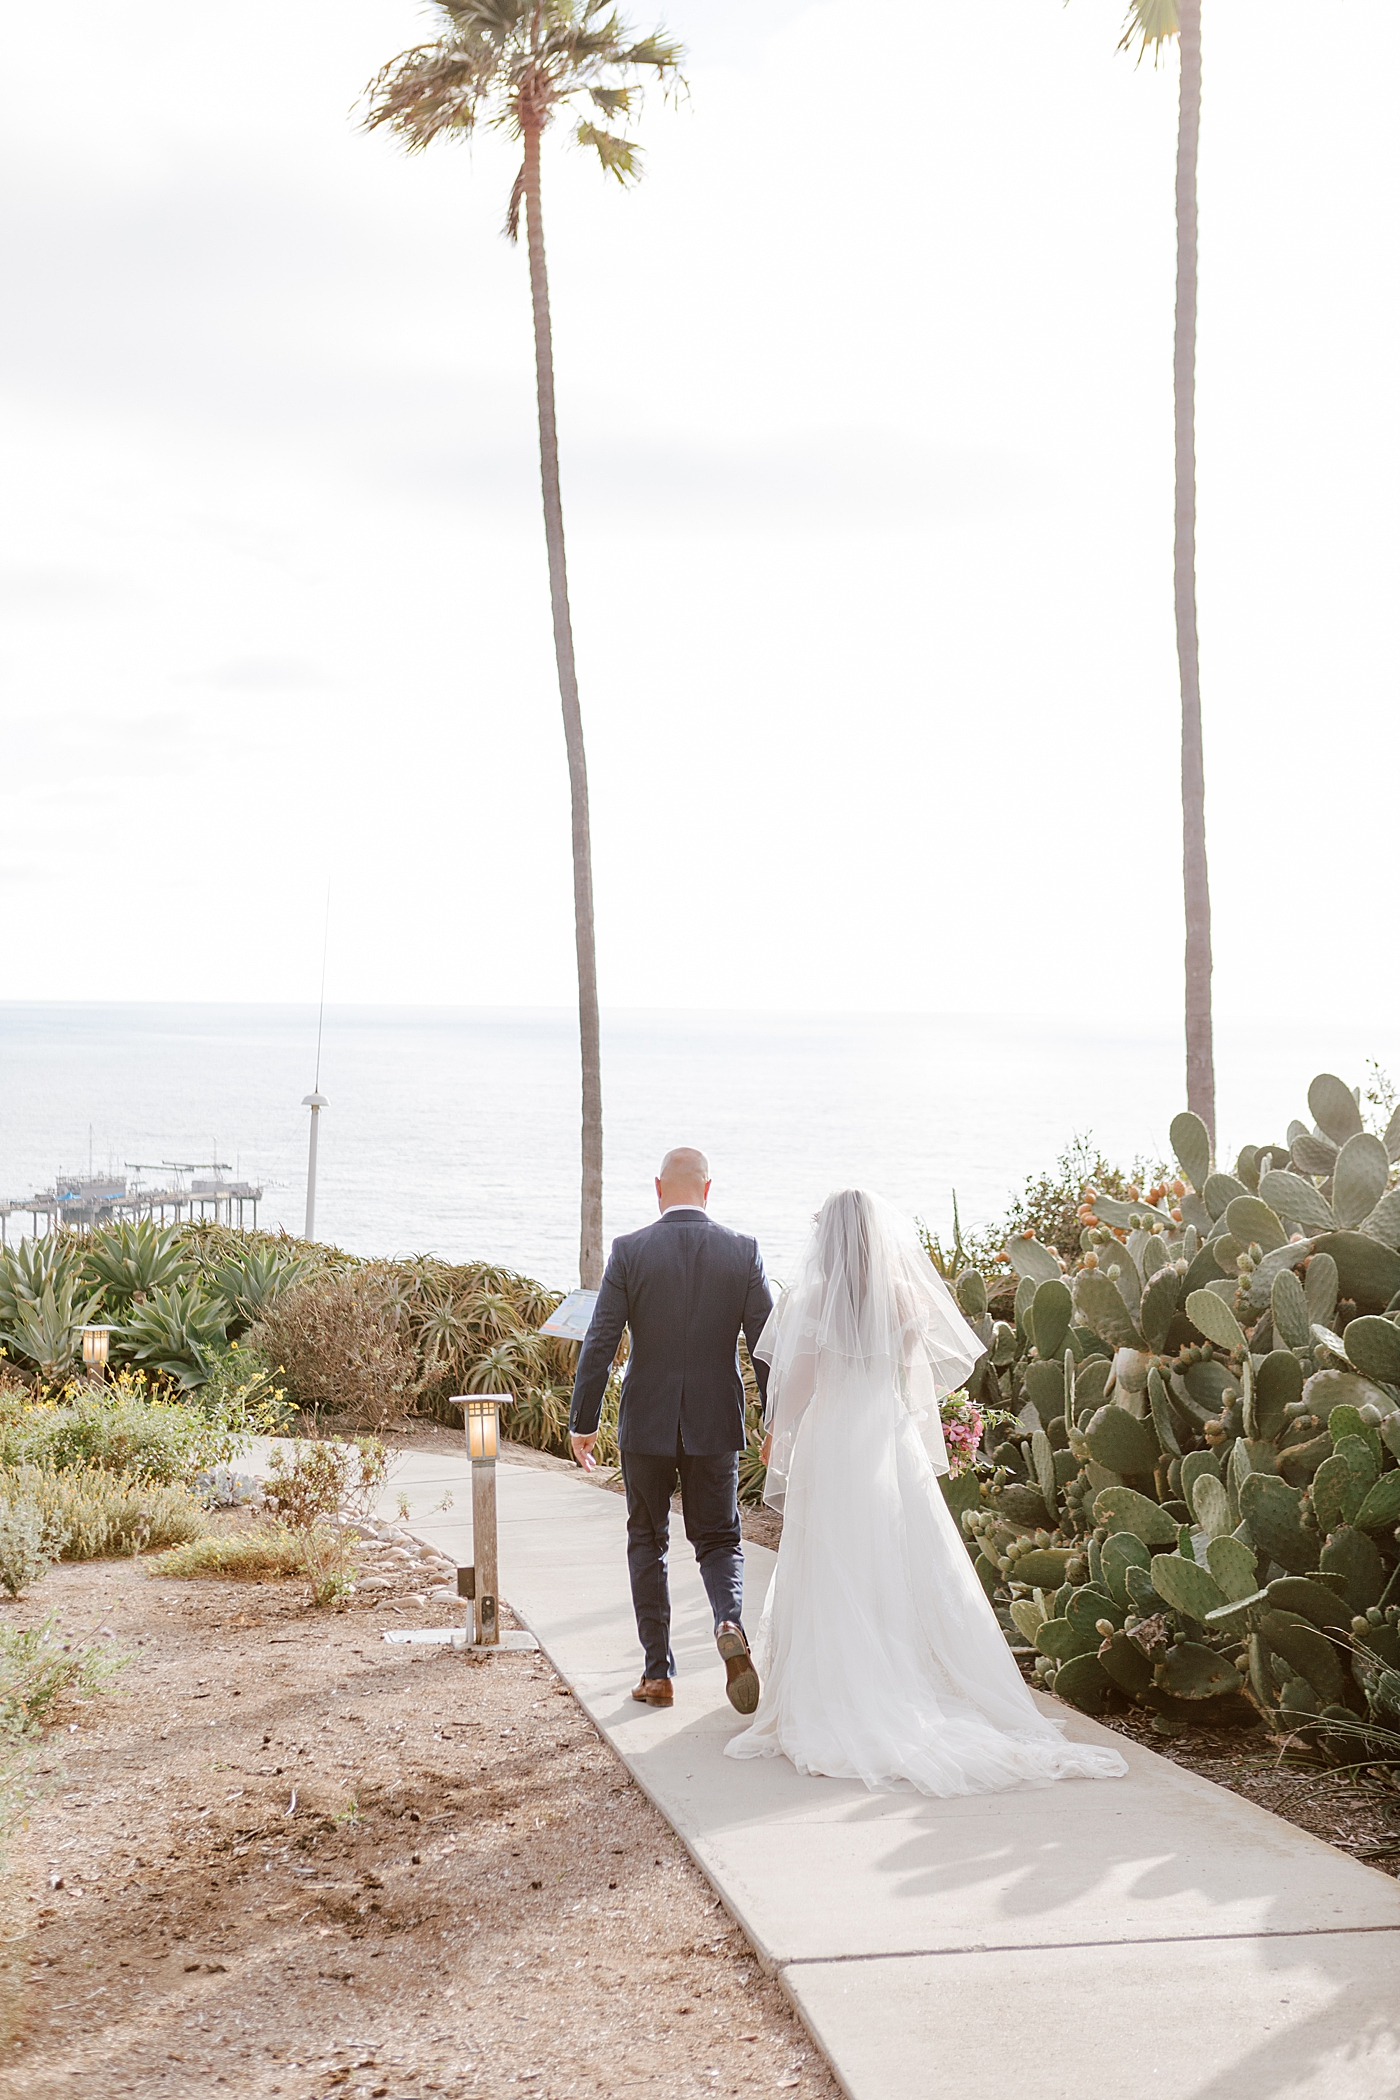 Groom in navy suit and bride in wedding dress holding hands while walking away from the camera on a seaside path | Image by San Diego Wedding Photographer Hope Helmuth